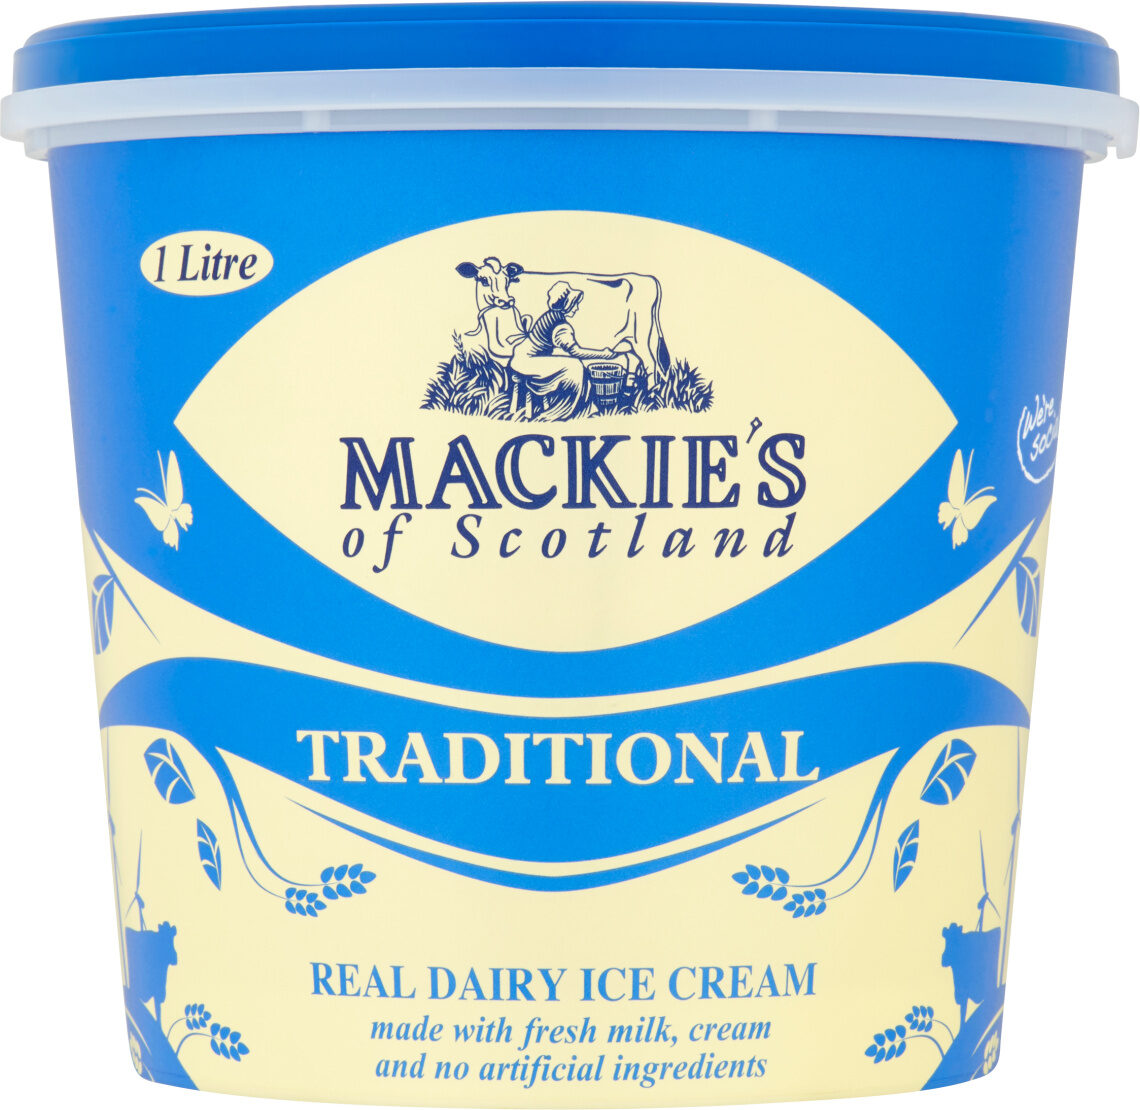 Mackie's of Scotland Traditional Real Dairy Ice Cream 1 Litre - Produkt - en